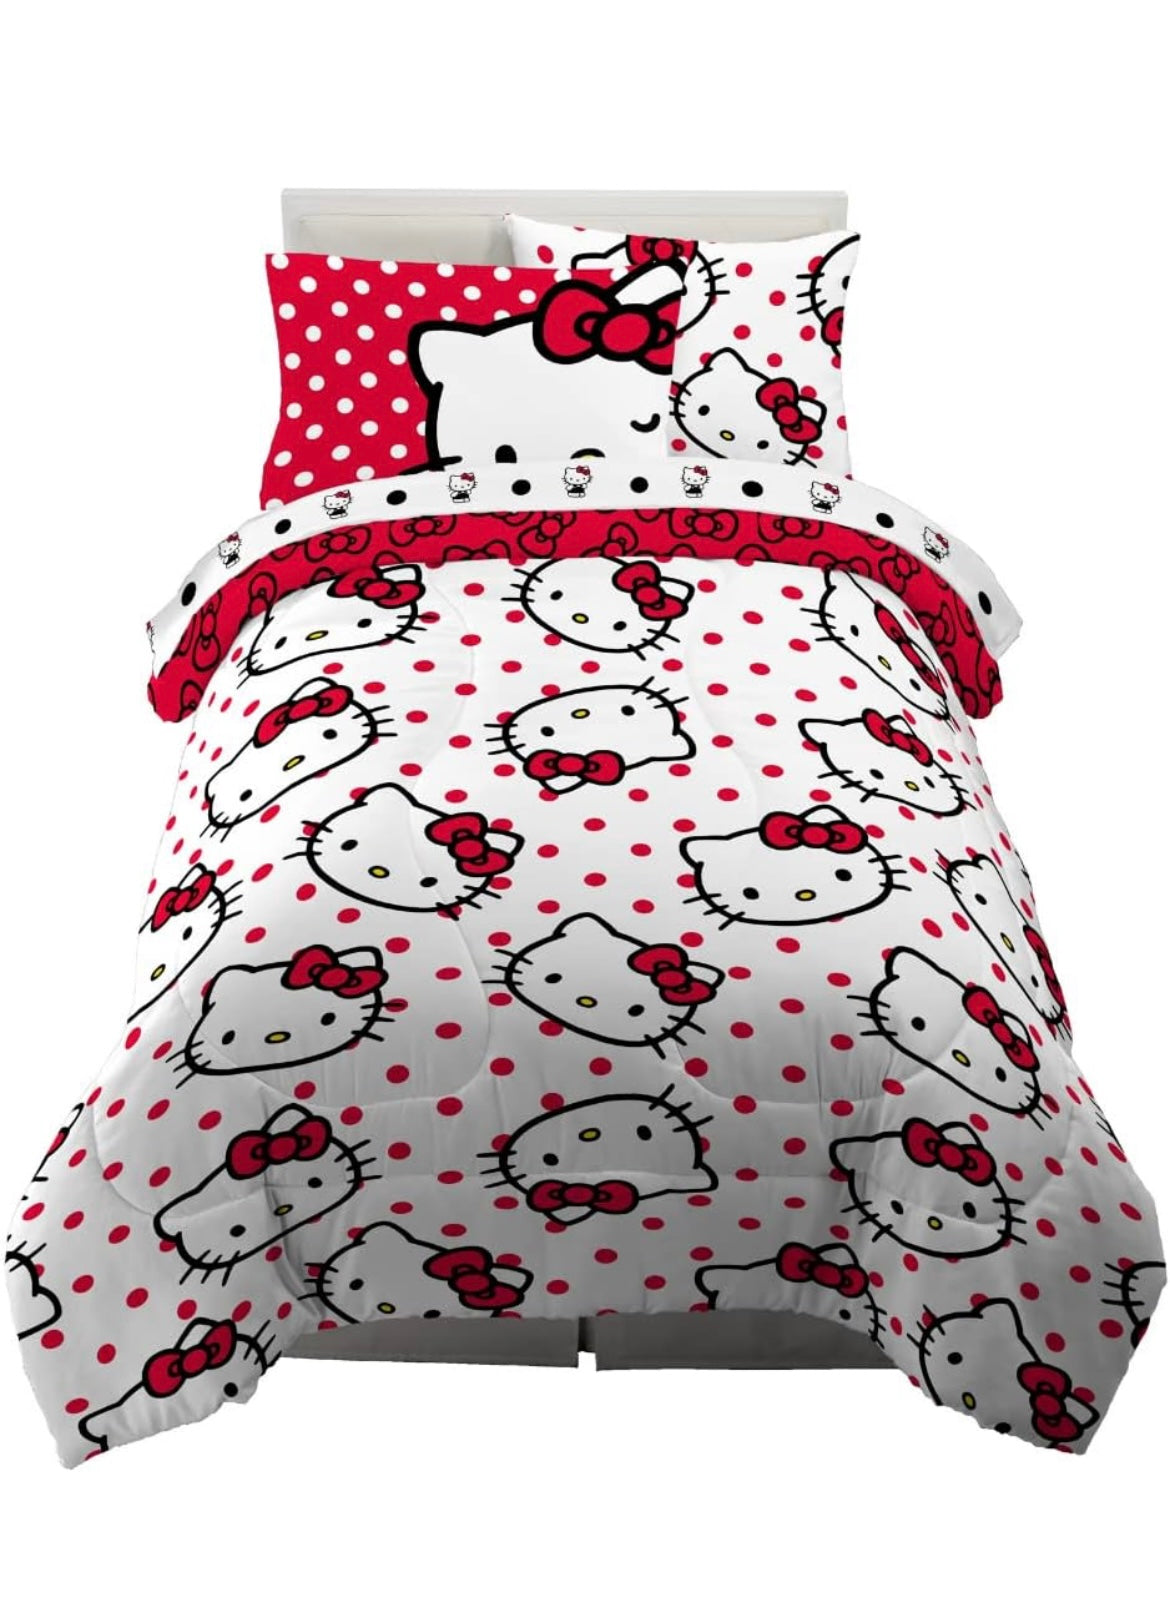 Franco Sanrio Hello Kitty Polka Dot Bedding 5 Piece Super Soft Comforter and Sheet Set with Sham, Twin, (100% Official Licensed Product) Collectibles